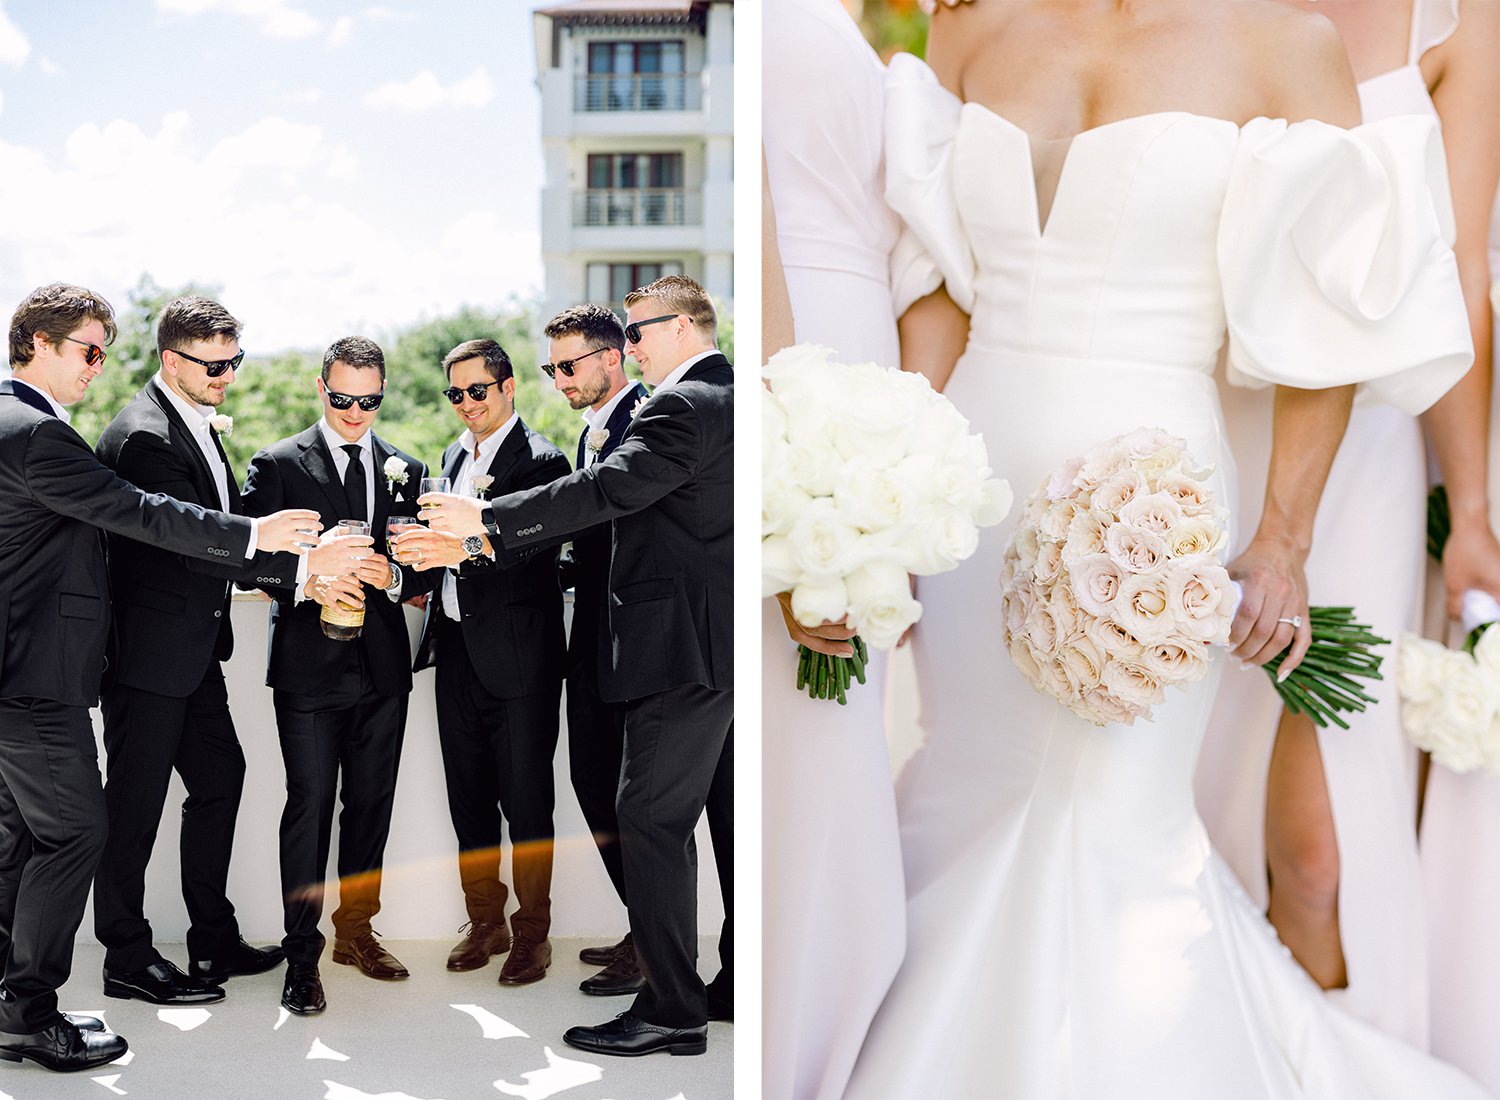 22 good looking groom with his groomsmen happily toasting with bourbon whisky and close up detail photo of bride in white wedding dress holding her bouquet of flowers and showing her engagement ring next to her bridesmaids at Dreams Riviera Cancun.JPG